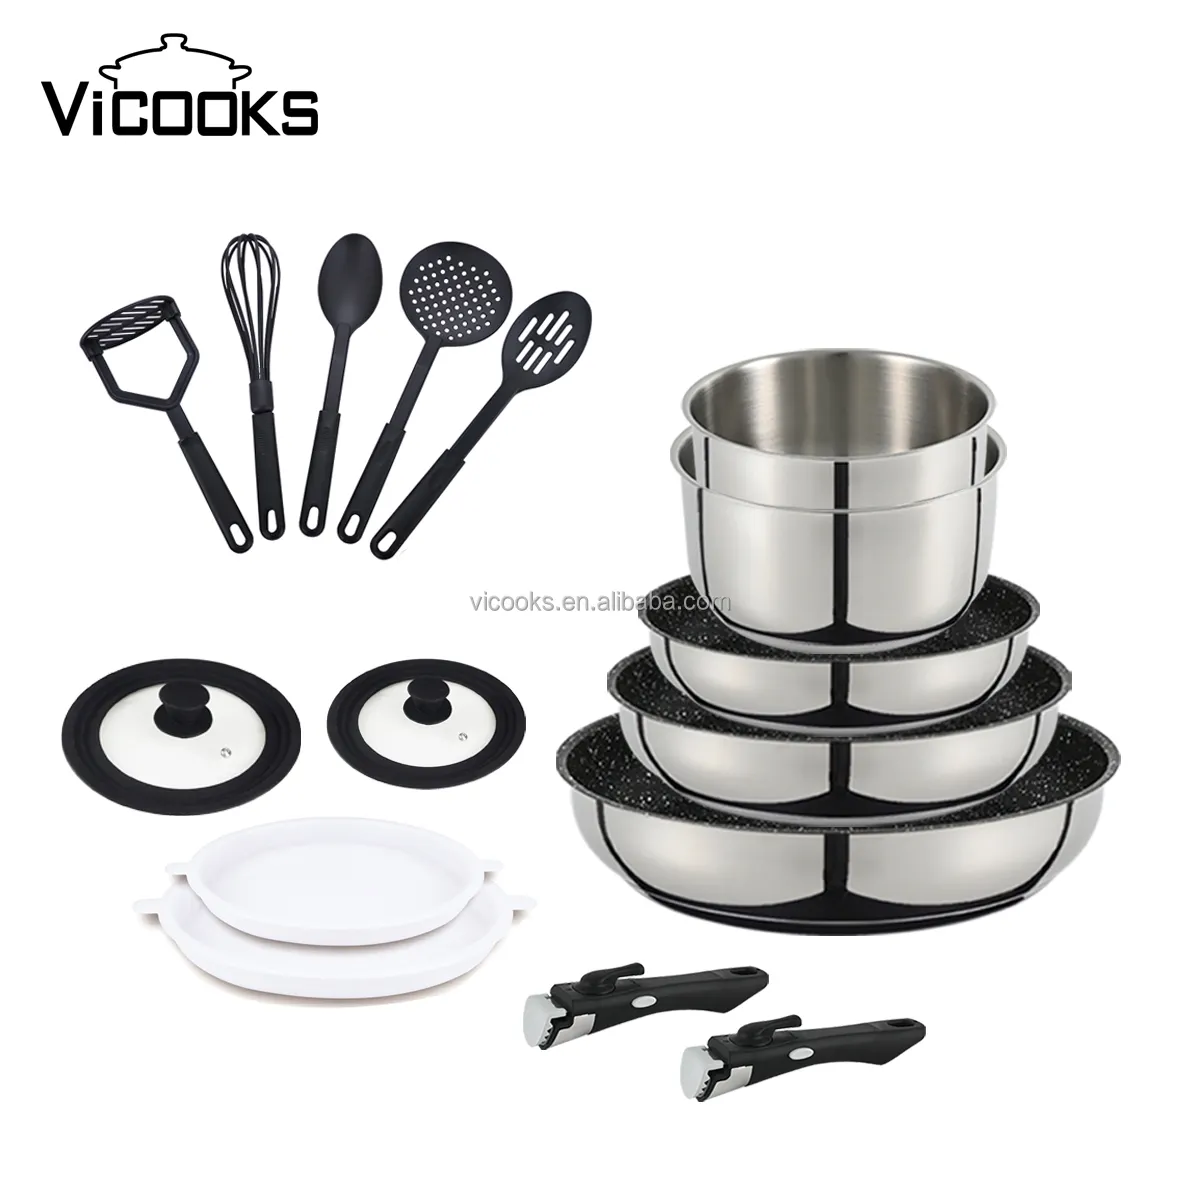 Stainless Steel Iron Pan With Removable Handle Cast Iron Cookware Set 10 Pieces Imusa Aluminum Pots